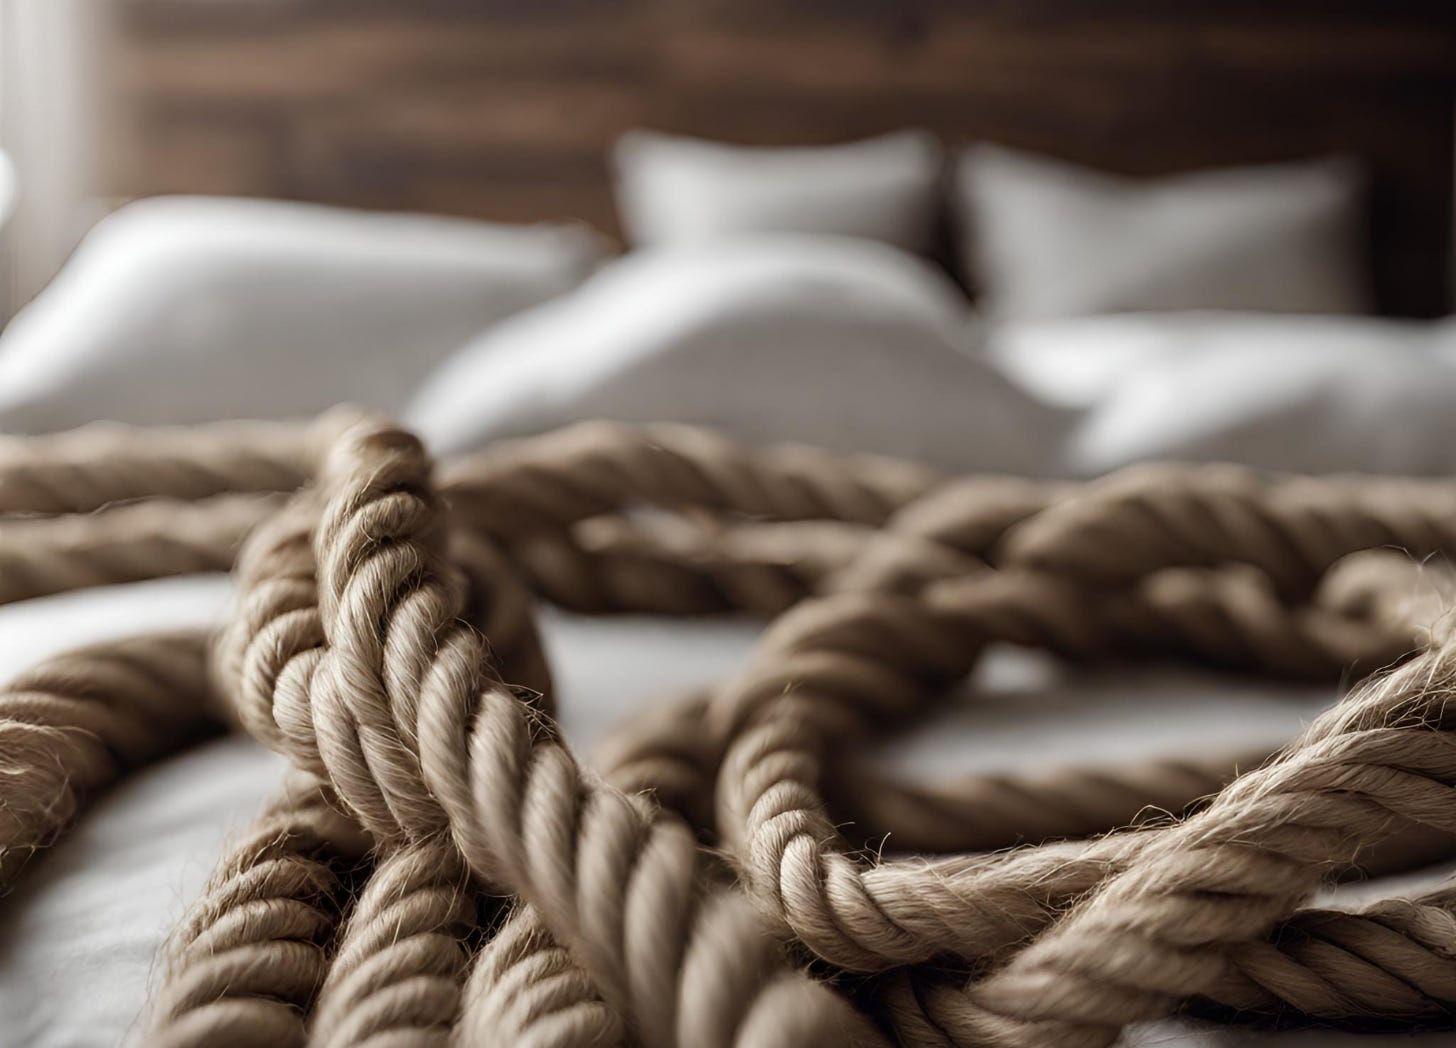 AI generated image of jute ropes for shibari in bed